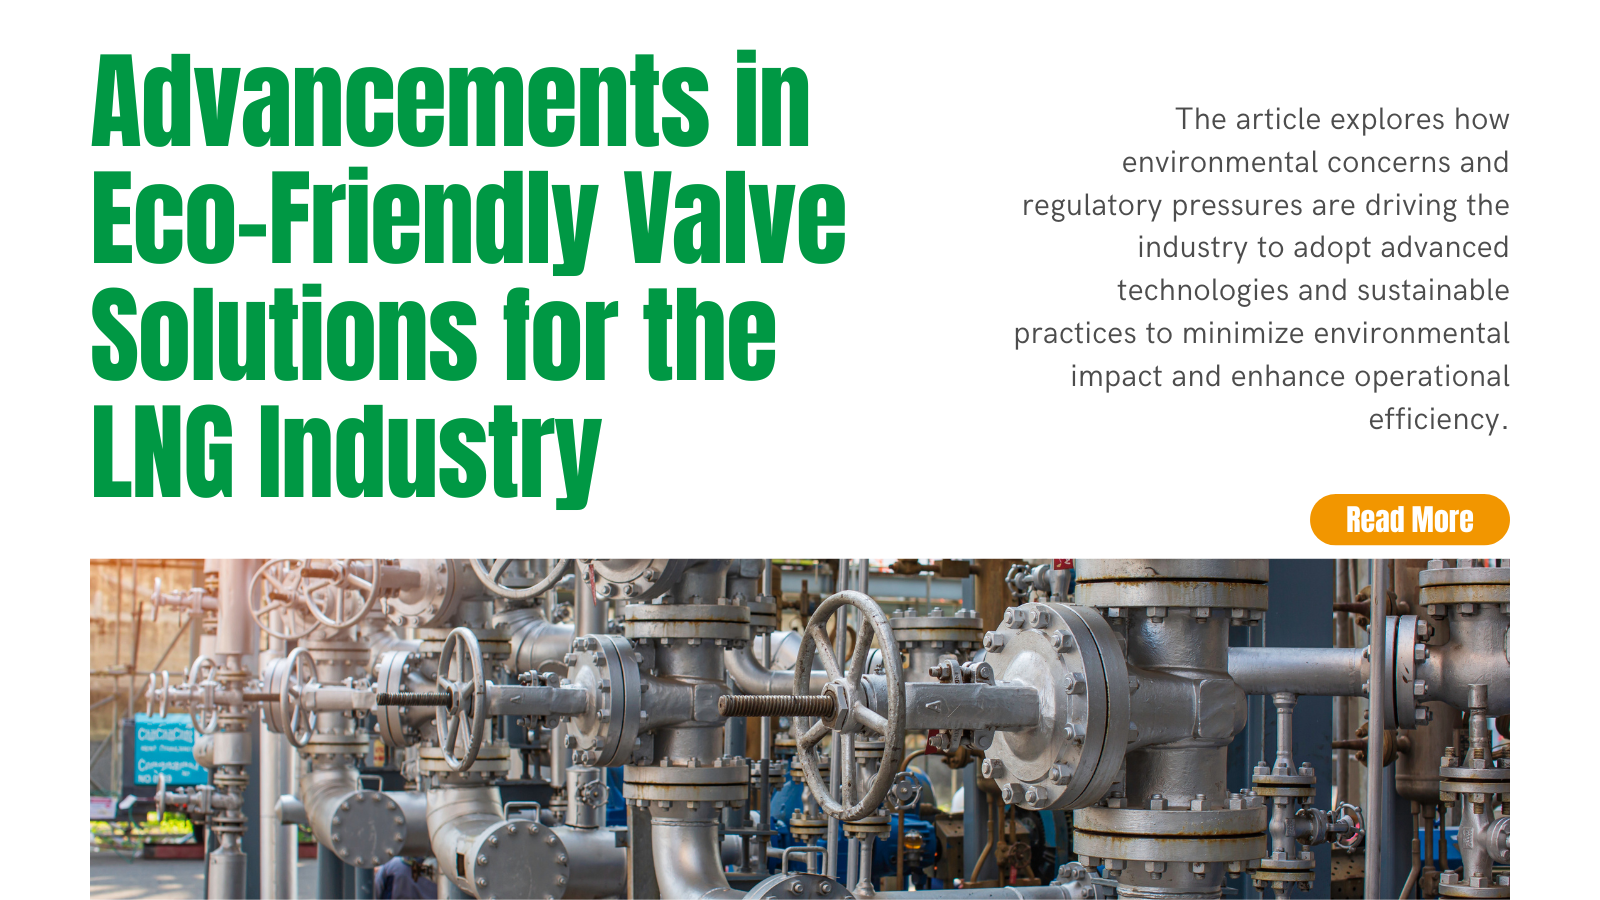 Innovation and Sustainability: Advancements in Eco-Friendly Valve Solutions for the LNG Industry | INOX-TEK